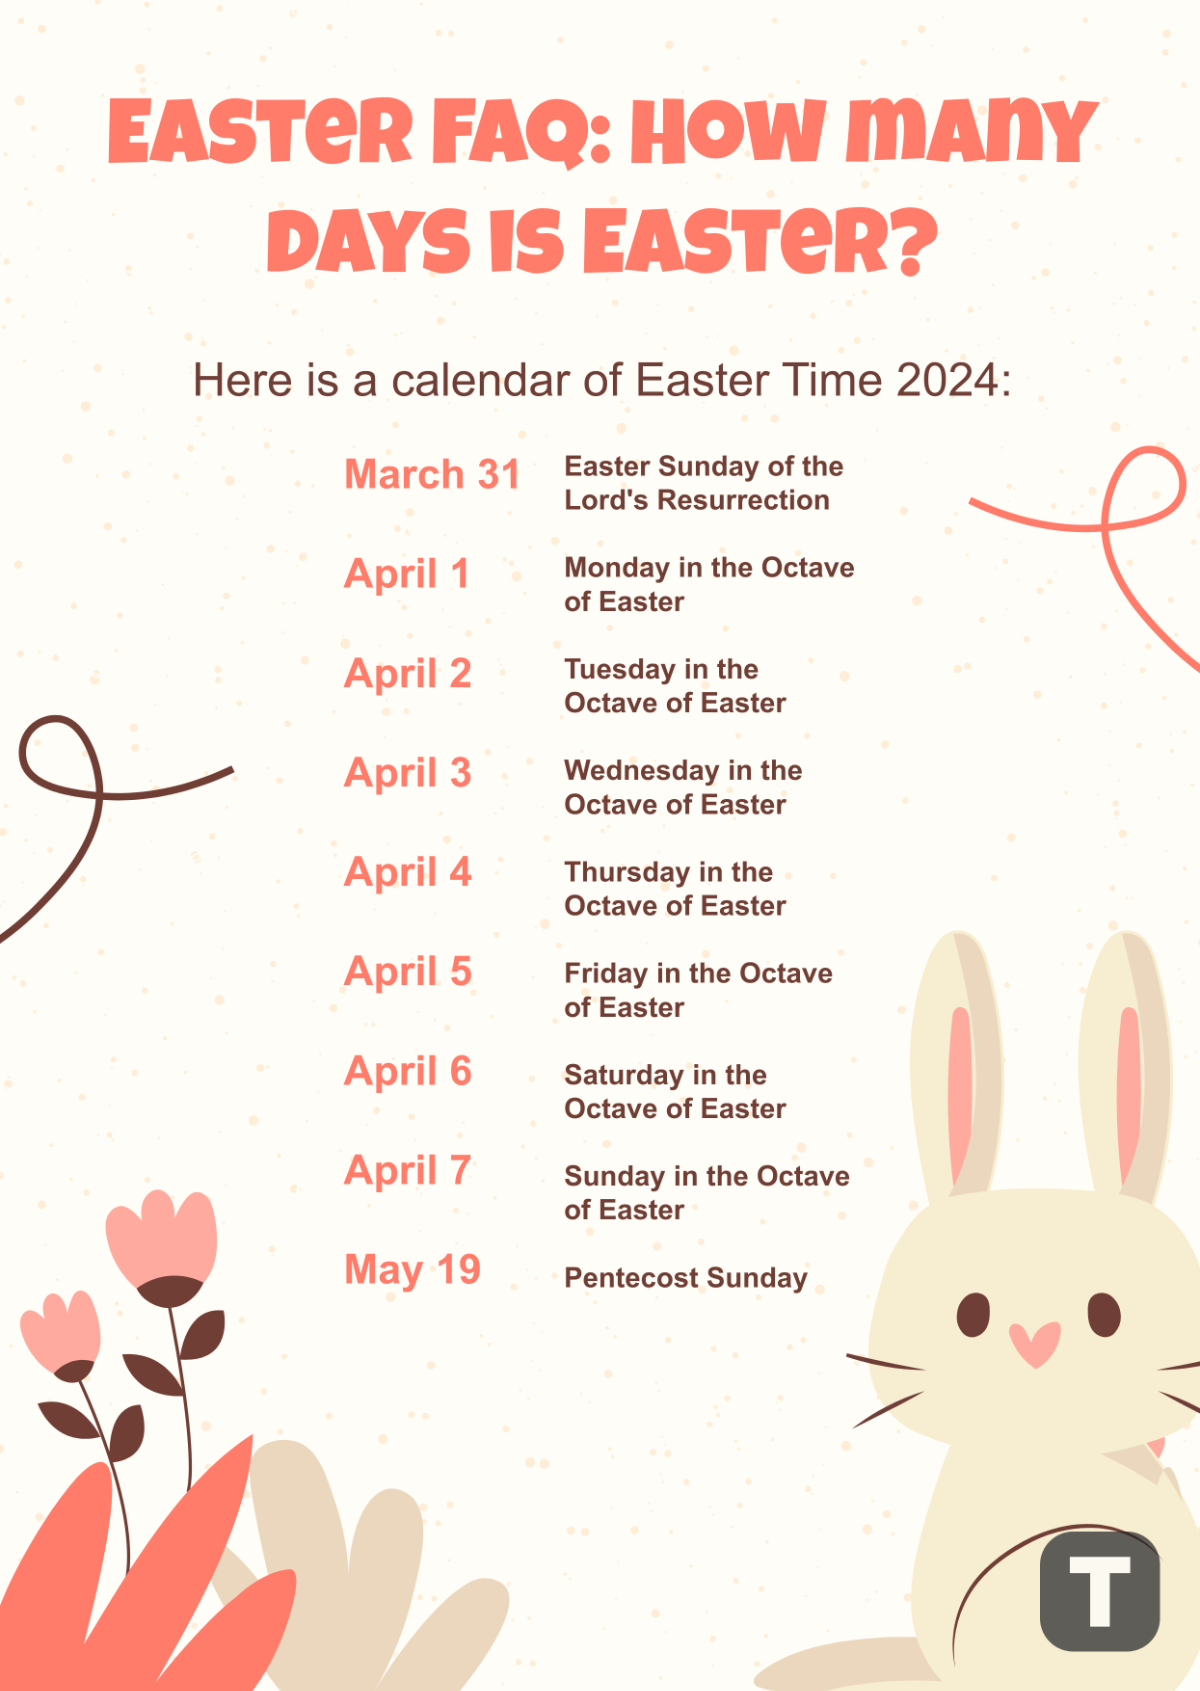 How many days of Easter?